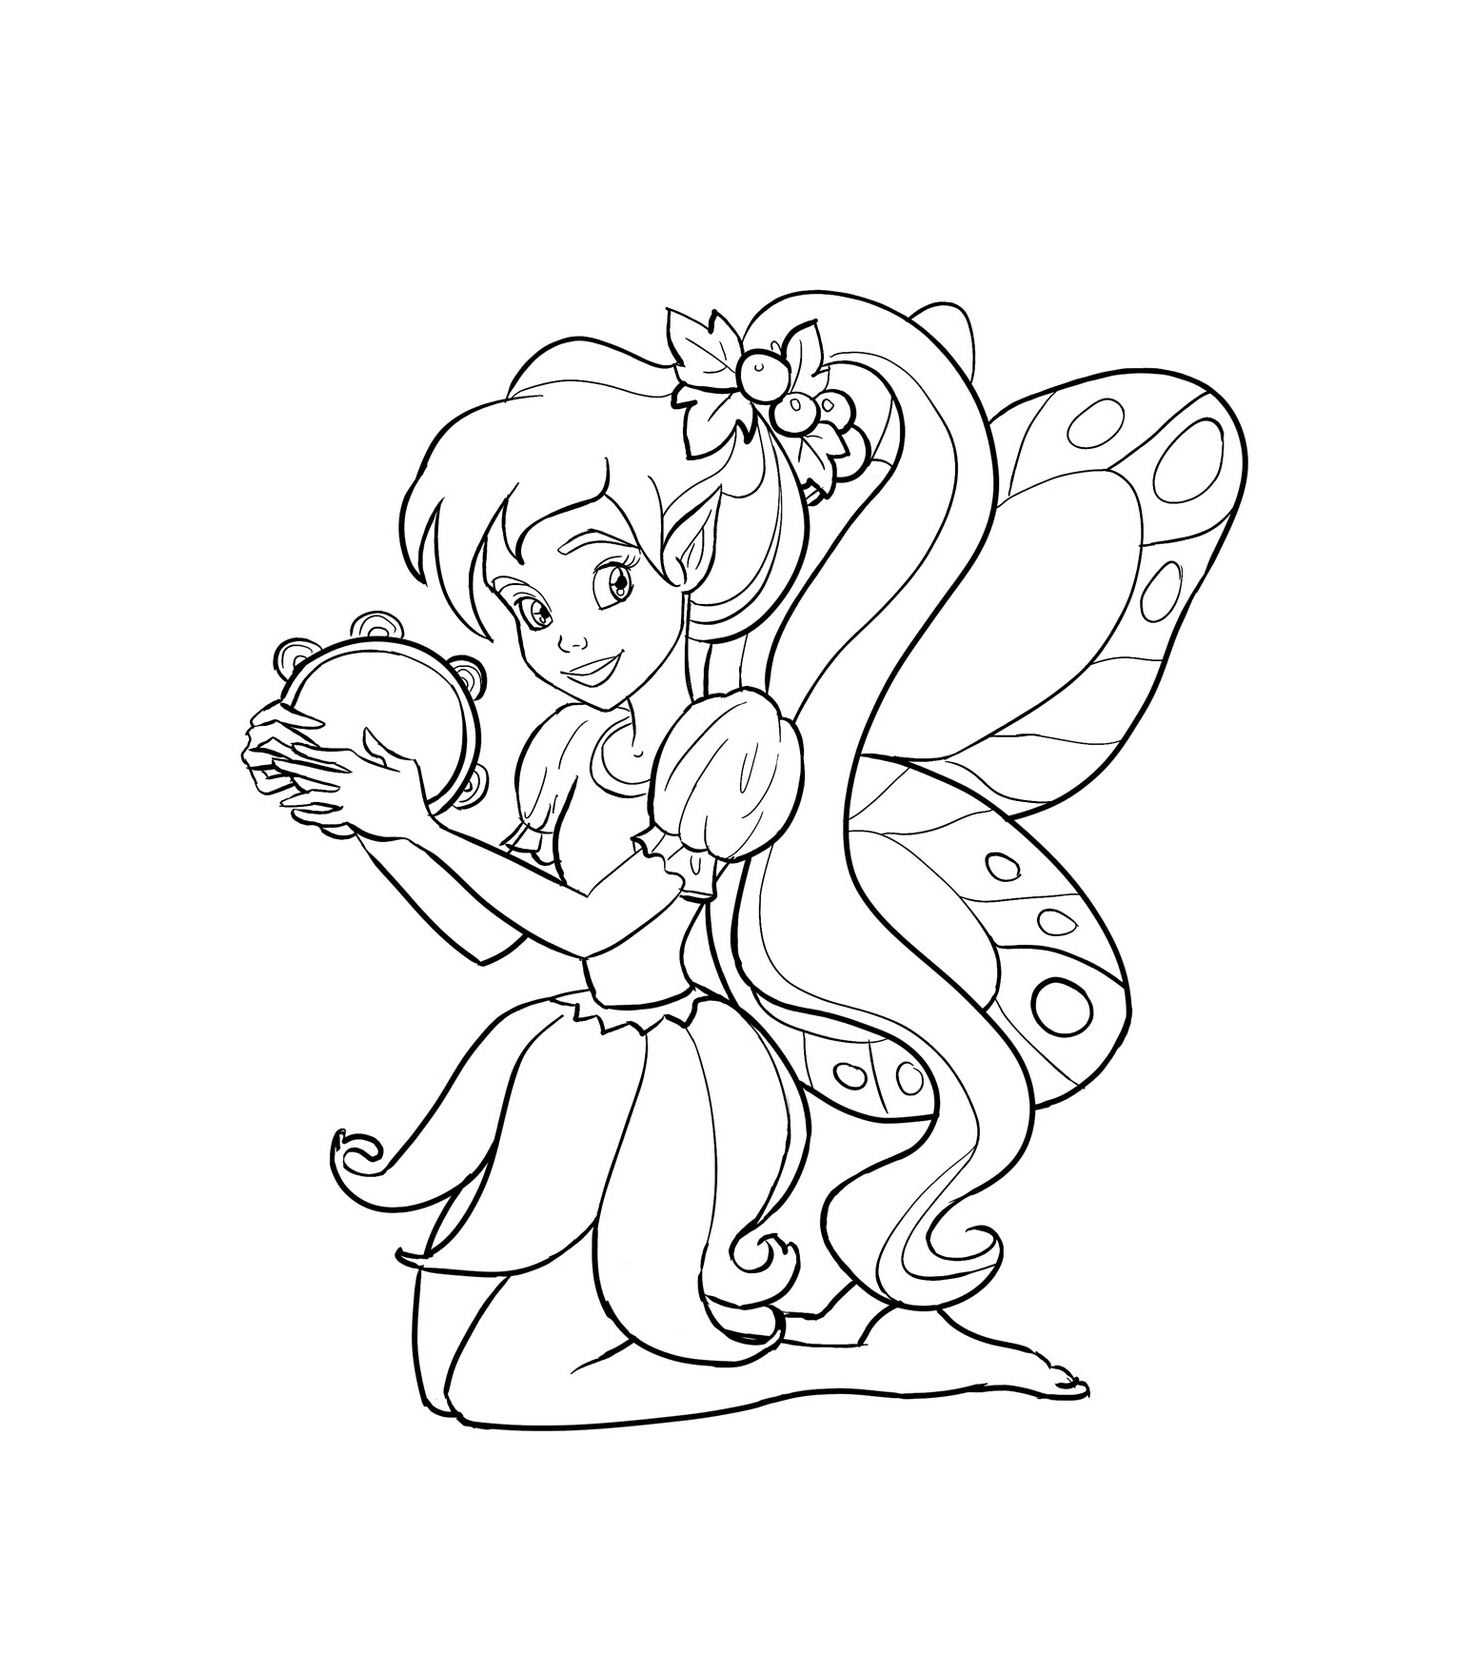 Fairy Musician coloring page